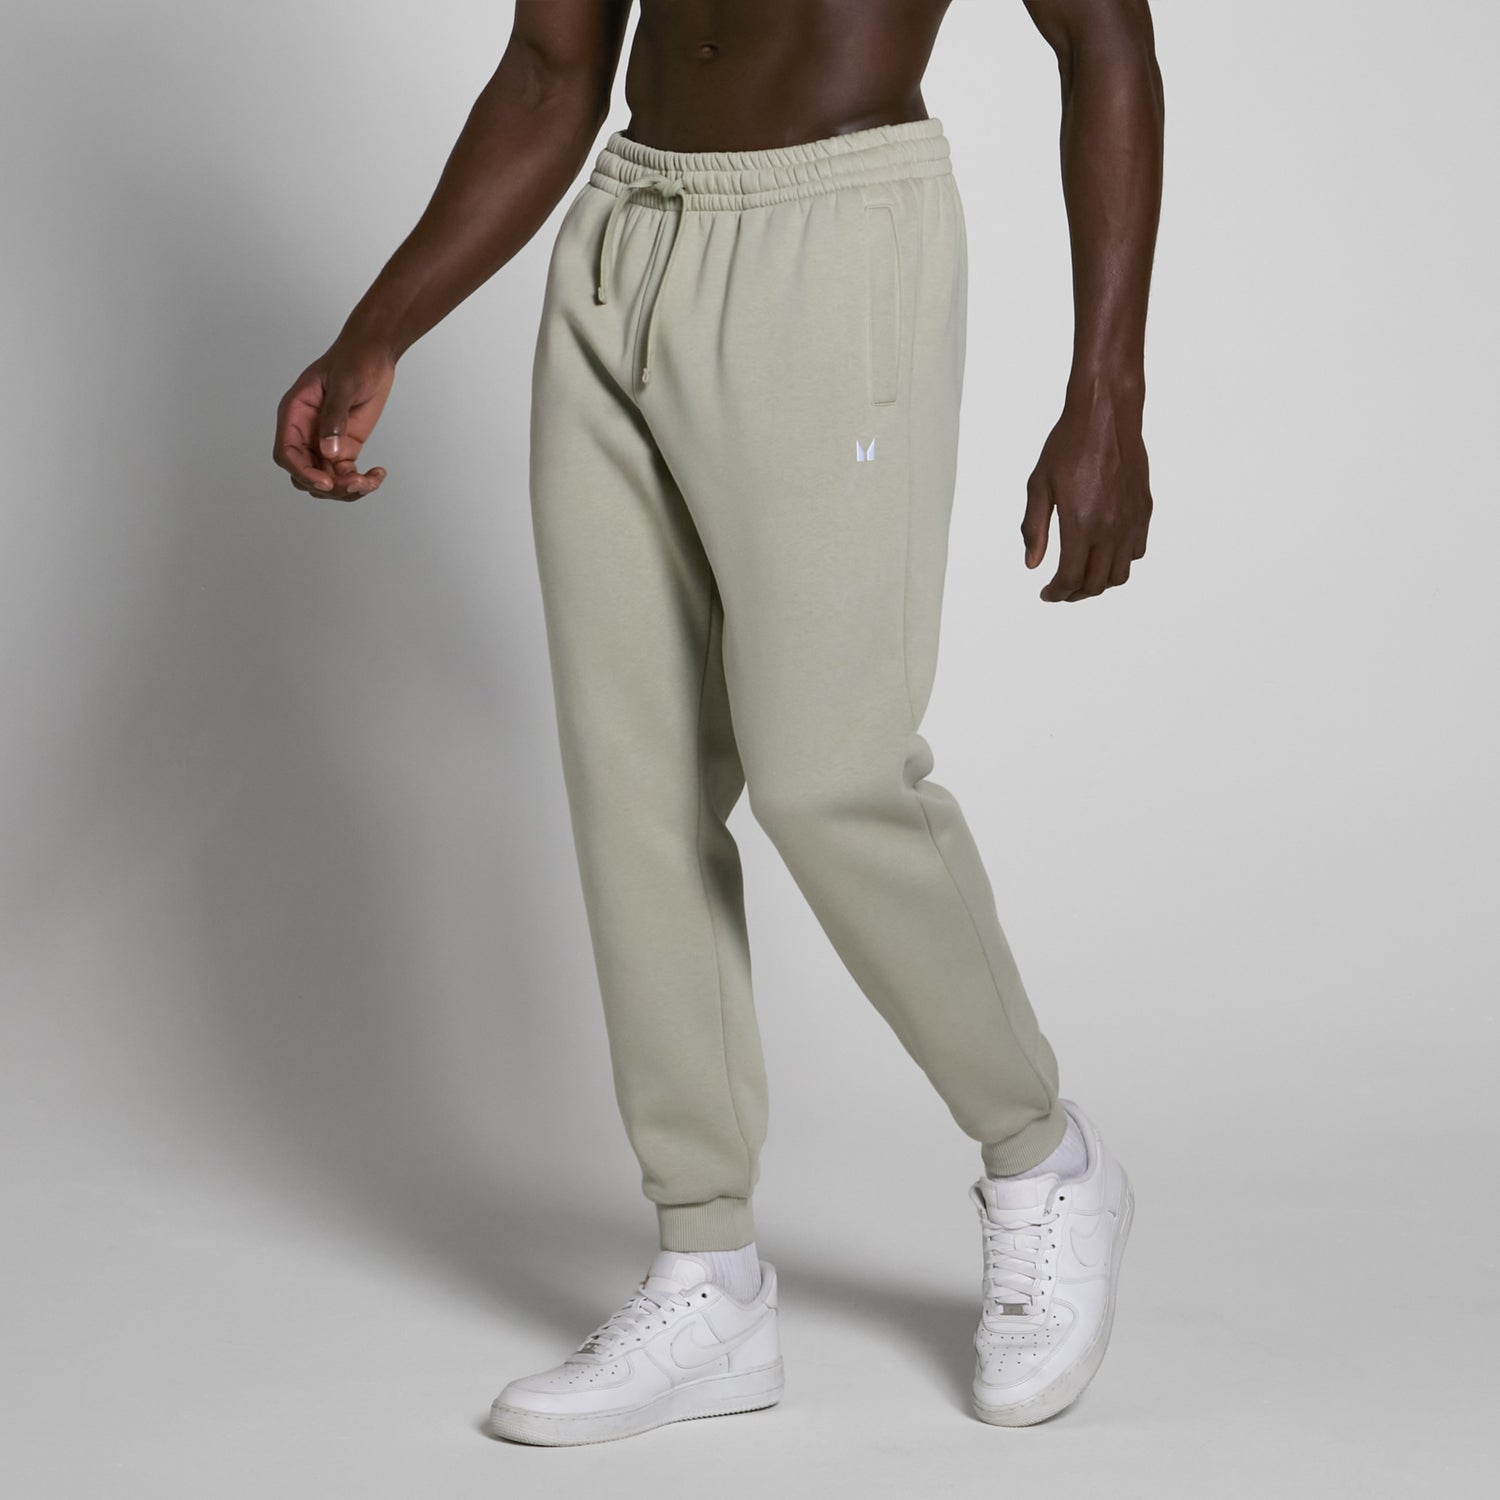 MP Men's Rest Day Joggers - Stone - XS